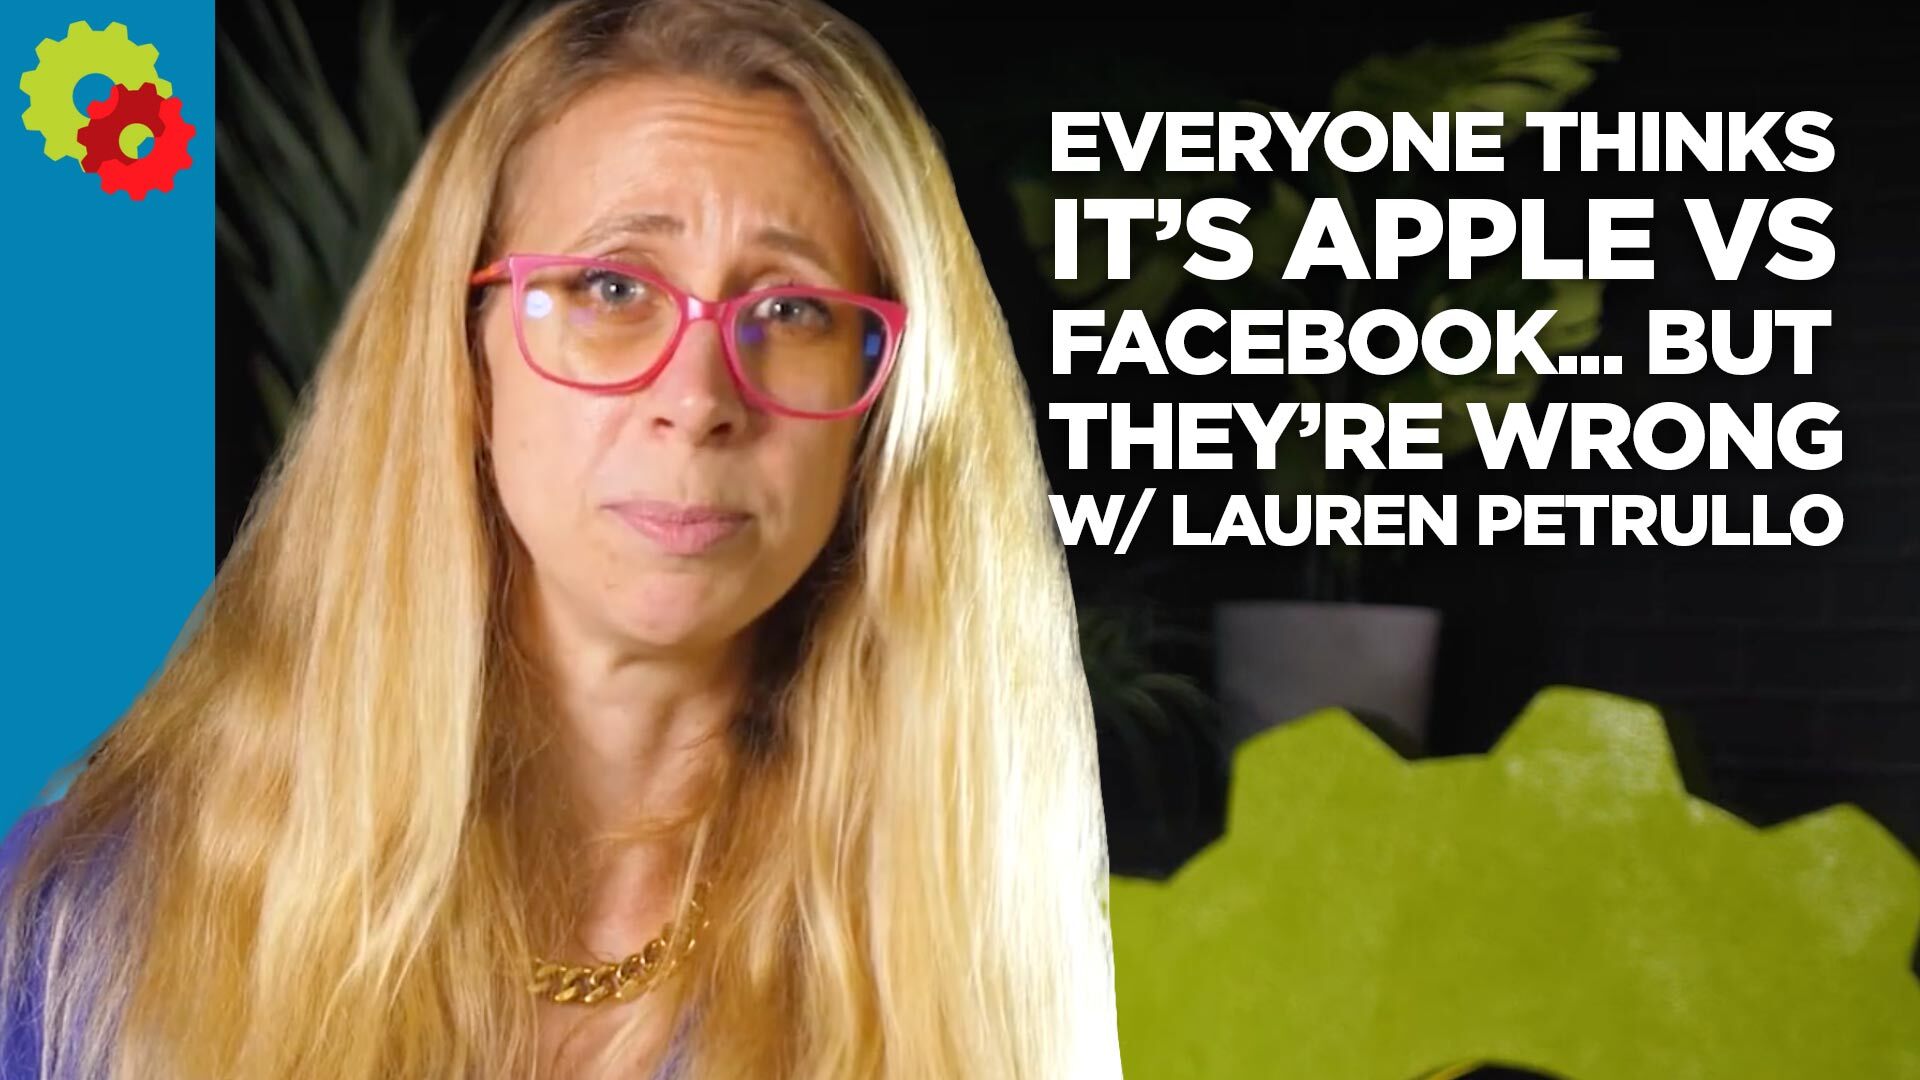 Everyone THINKS It's Apple Versus Facebook, But They're Wrong! with Lauren Petrullo [VIDEO]